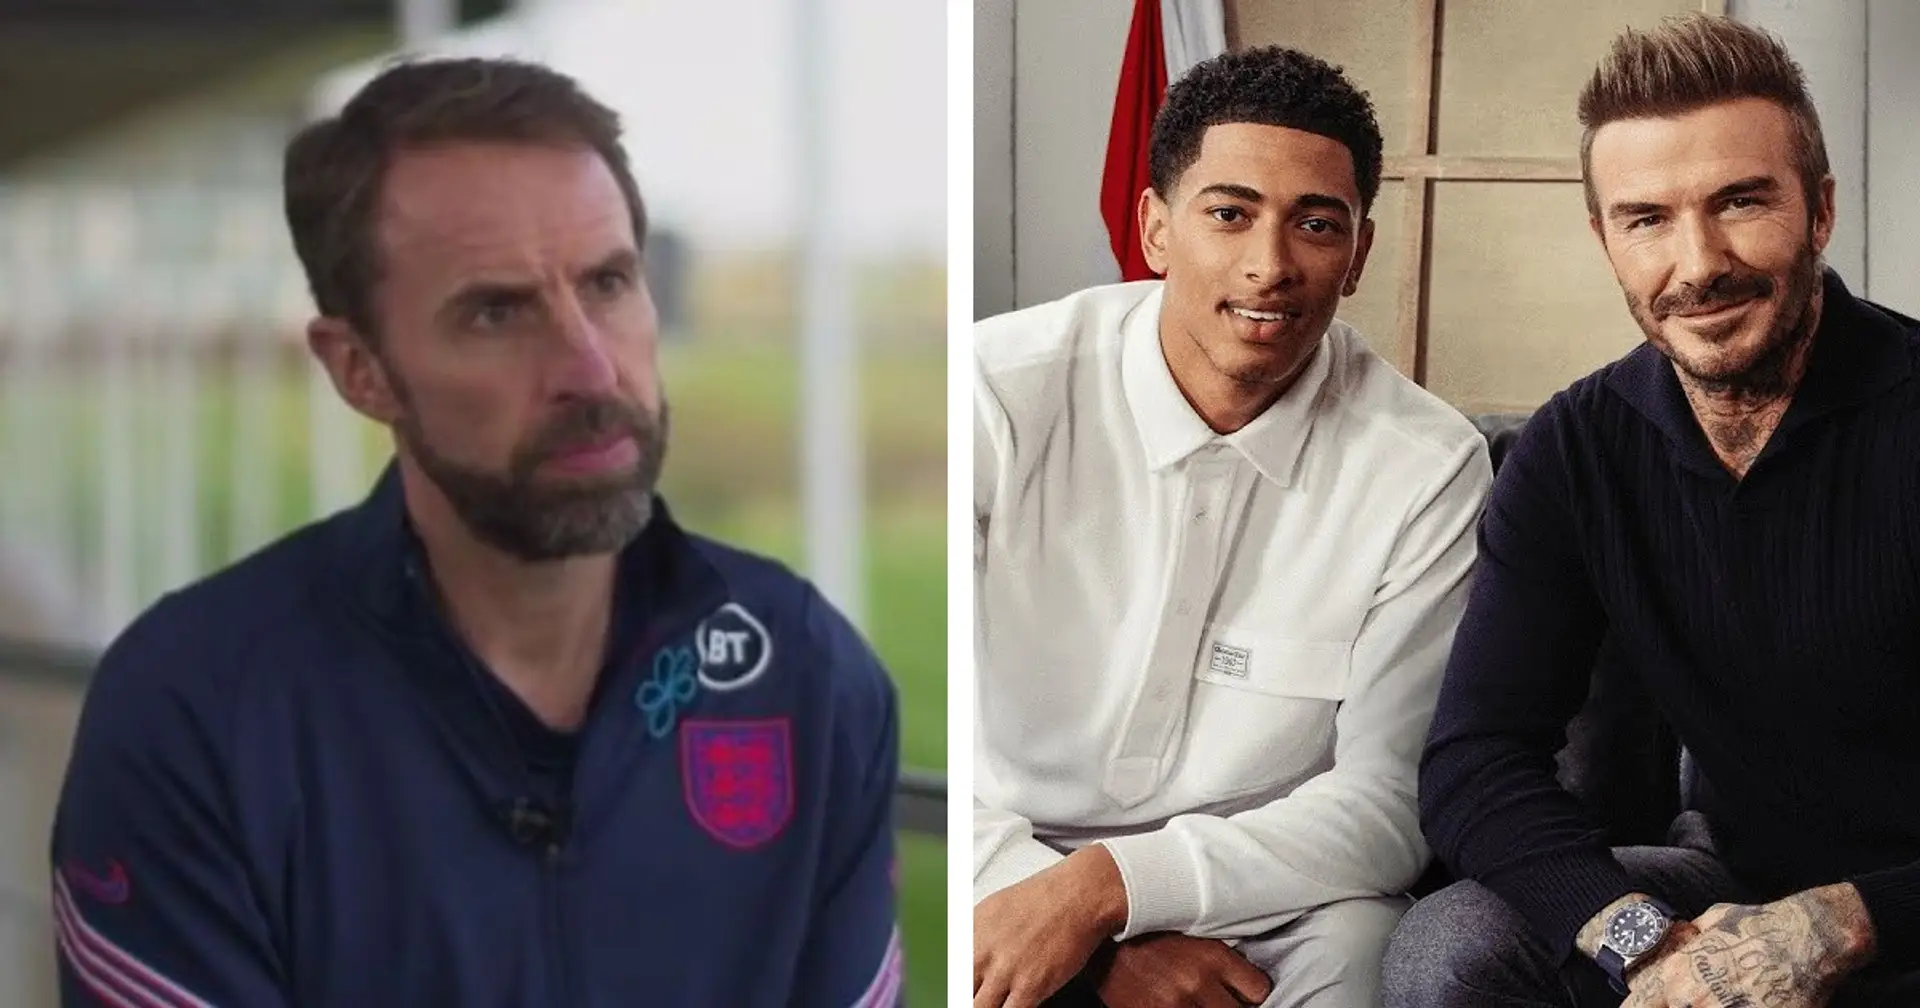 'Jude lives in a different world': Gareth Southgate draws comparison between Bellingham and Beckham